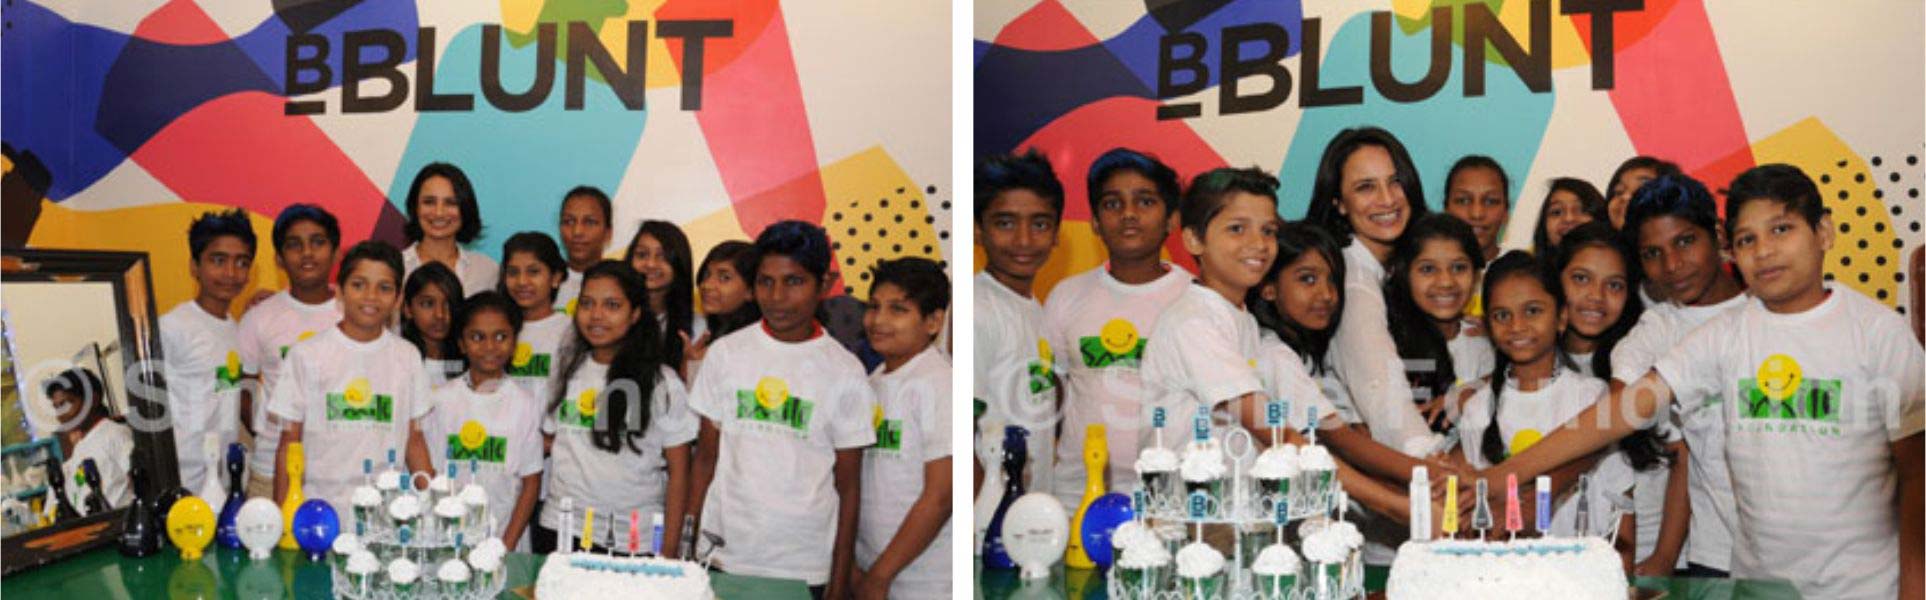 BBLUNT Style Bar celebrates Children’s Day with Smile Foundation champs